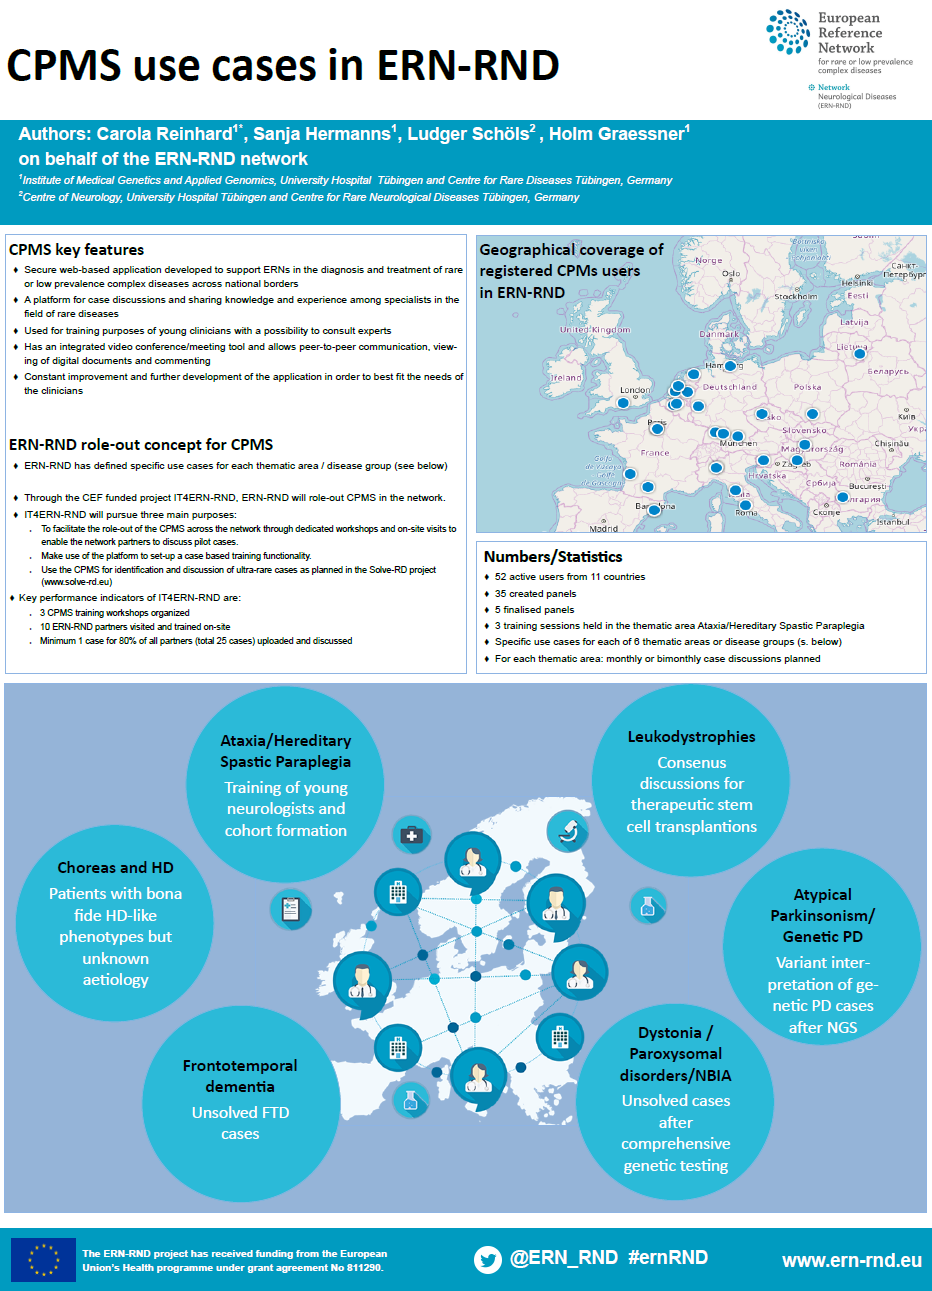 Poster: “CPMS use cases in ERN-RND”